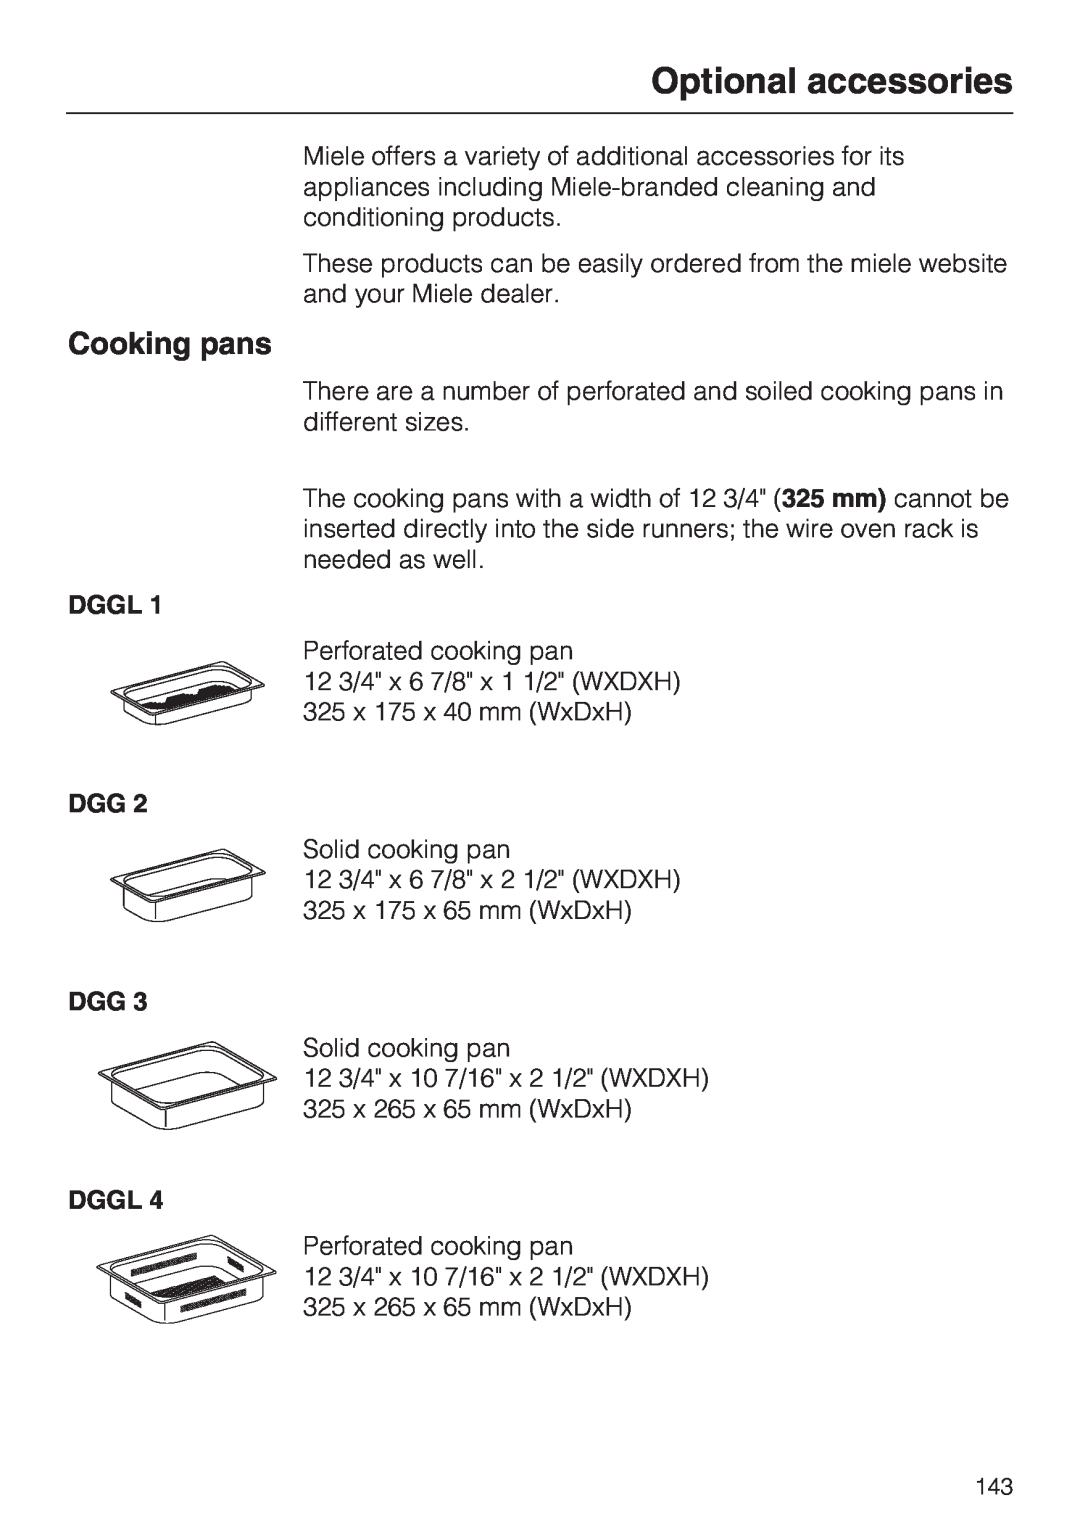 Miele 09 855 050 installation instructions Optional accessories, Cooking pans 